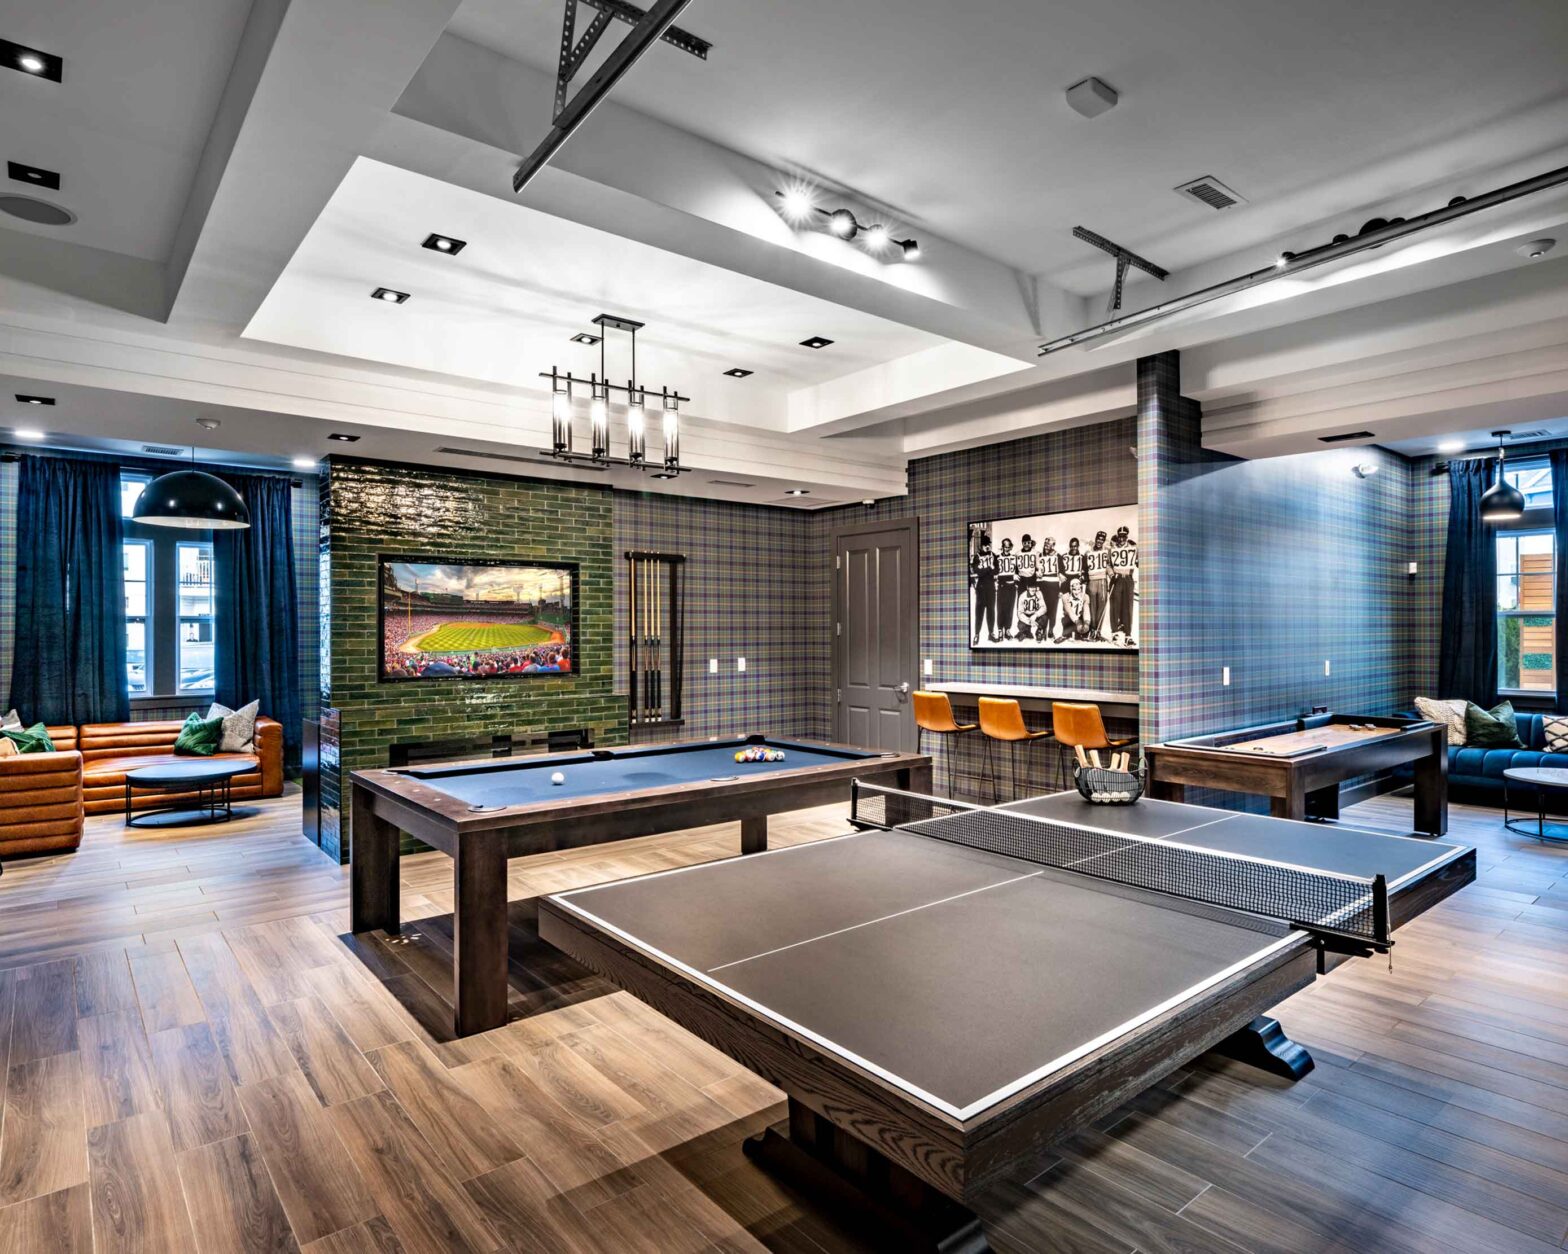 Clubhouse with pool table and televisions luxury amenity for residents